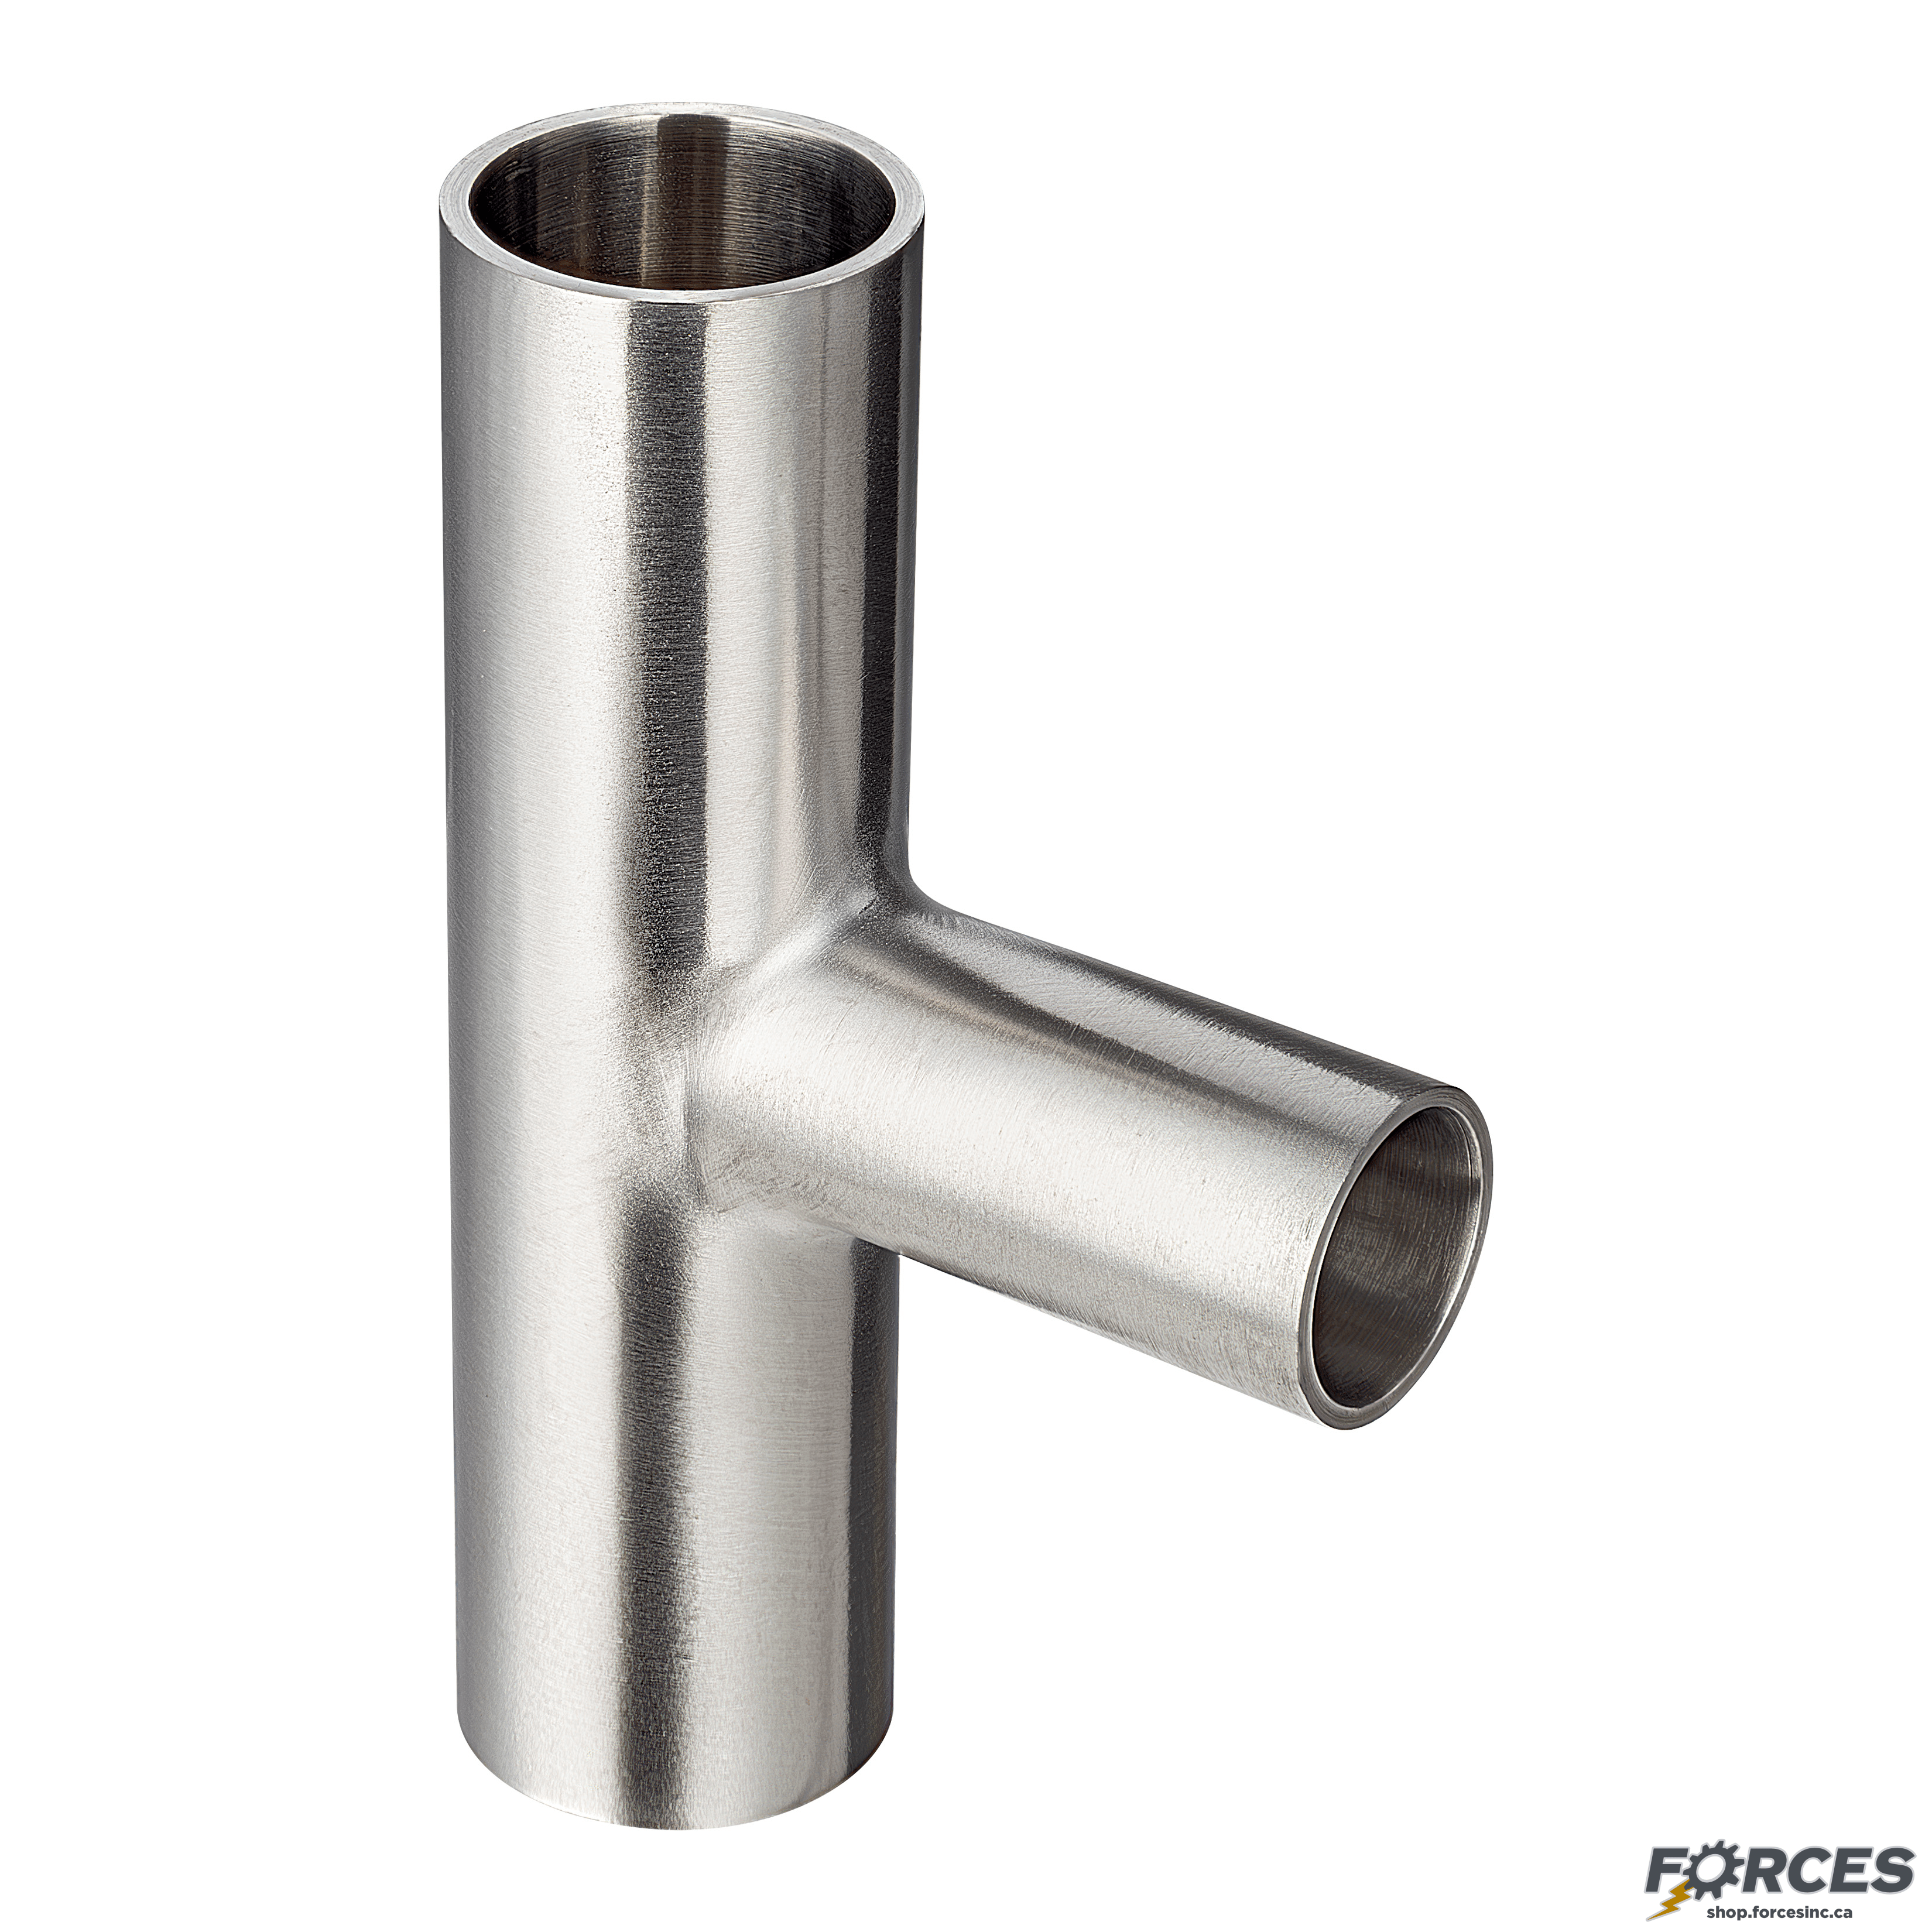 1-1/2" x 1/2" Butt Weld Tee Reducer - Stainless Steel 316 - Forces Inc